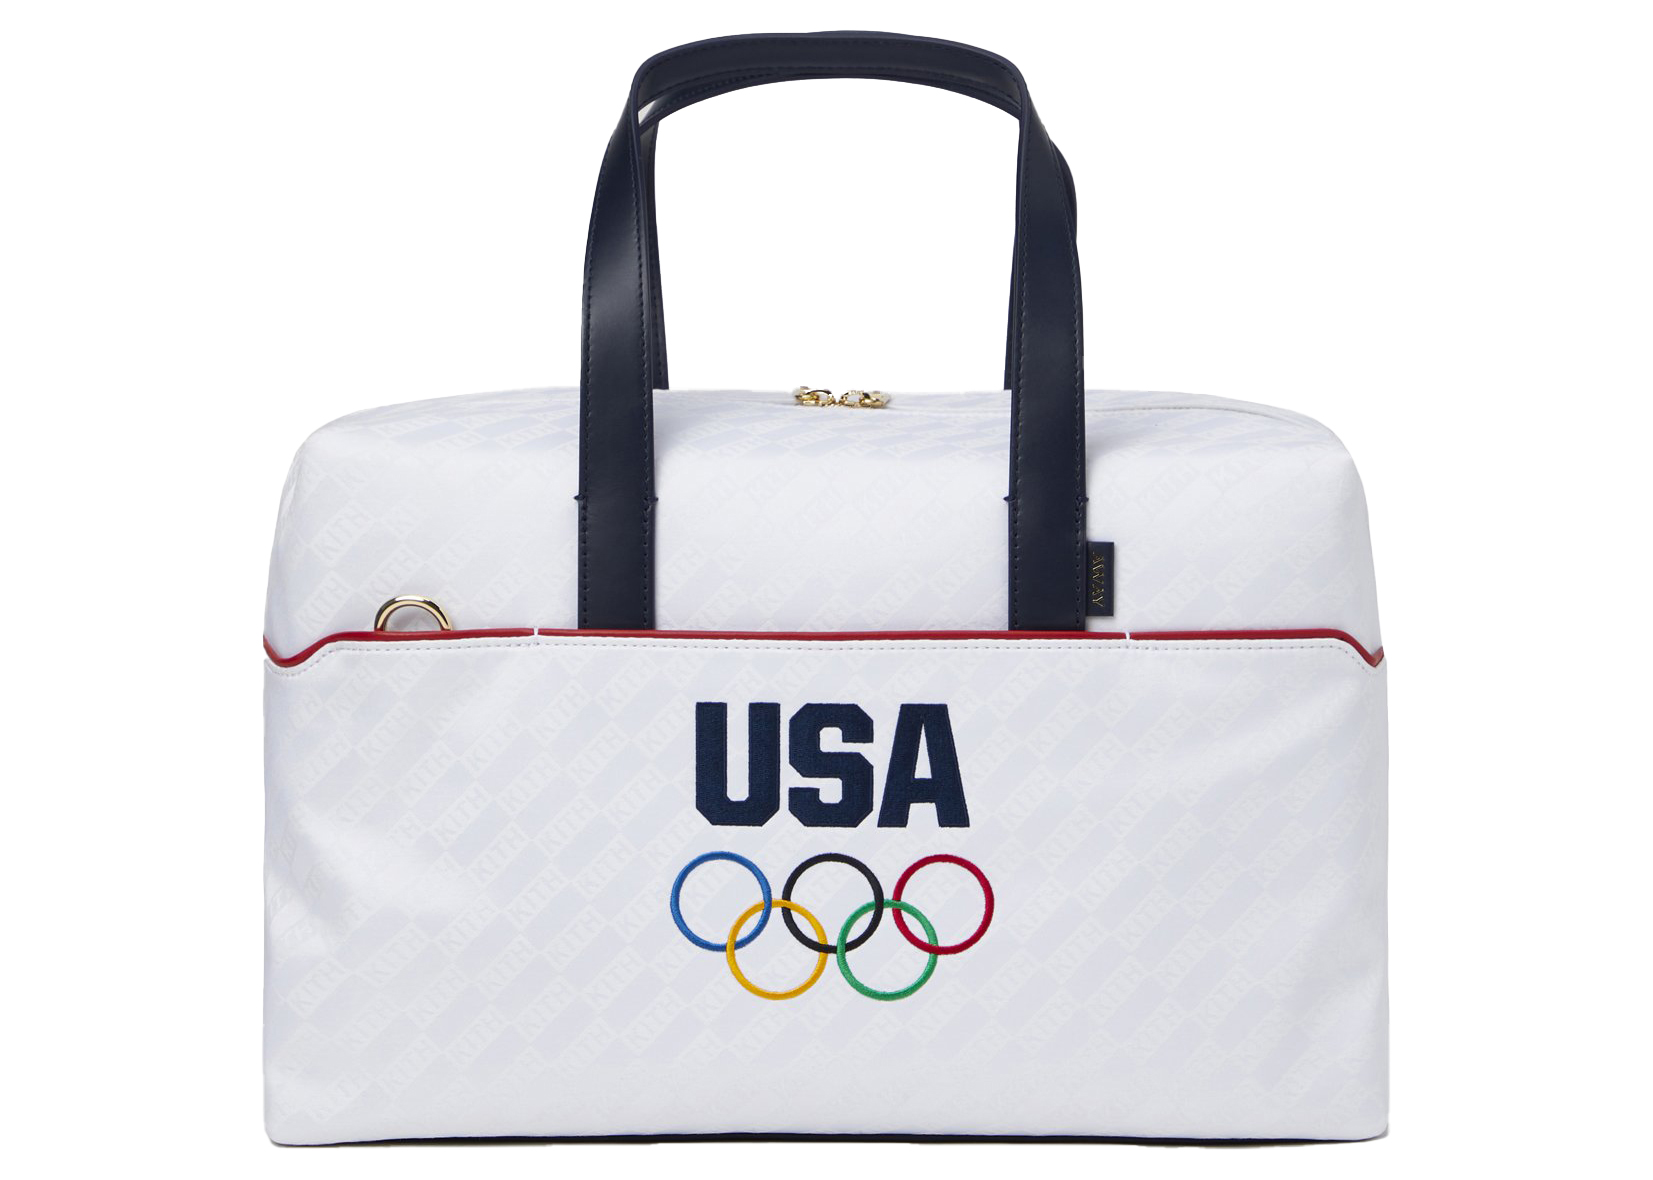 Kith for Team USA & Away Aluminum Bigger Carry-On Luggage Navy 